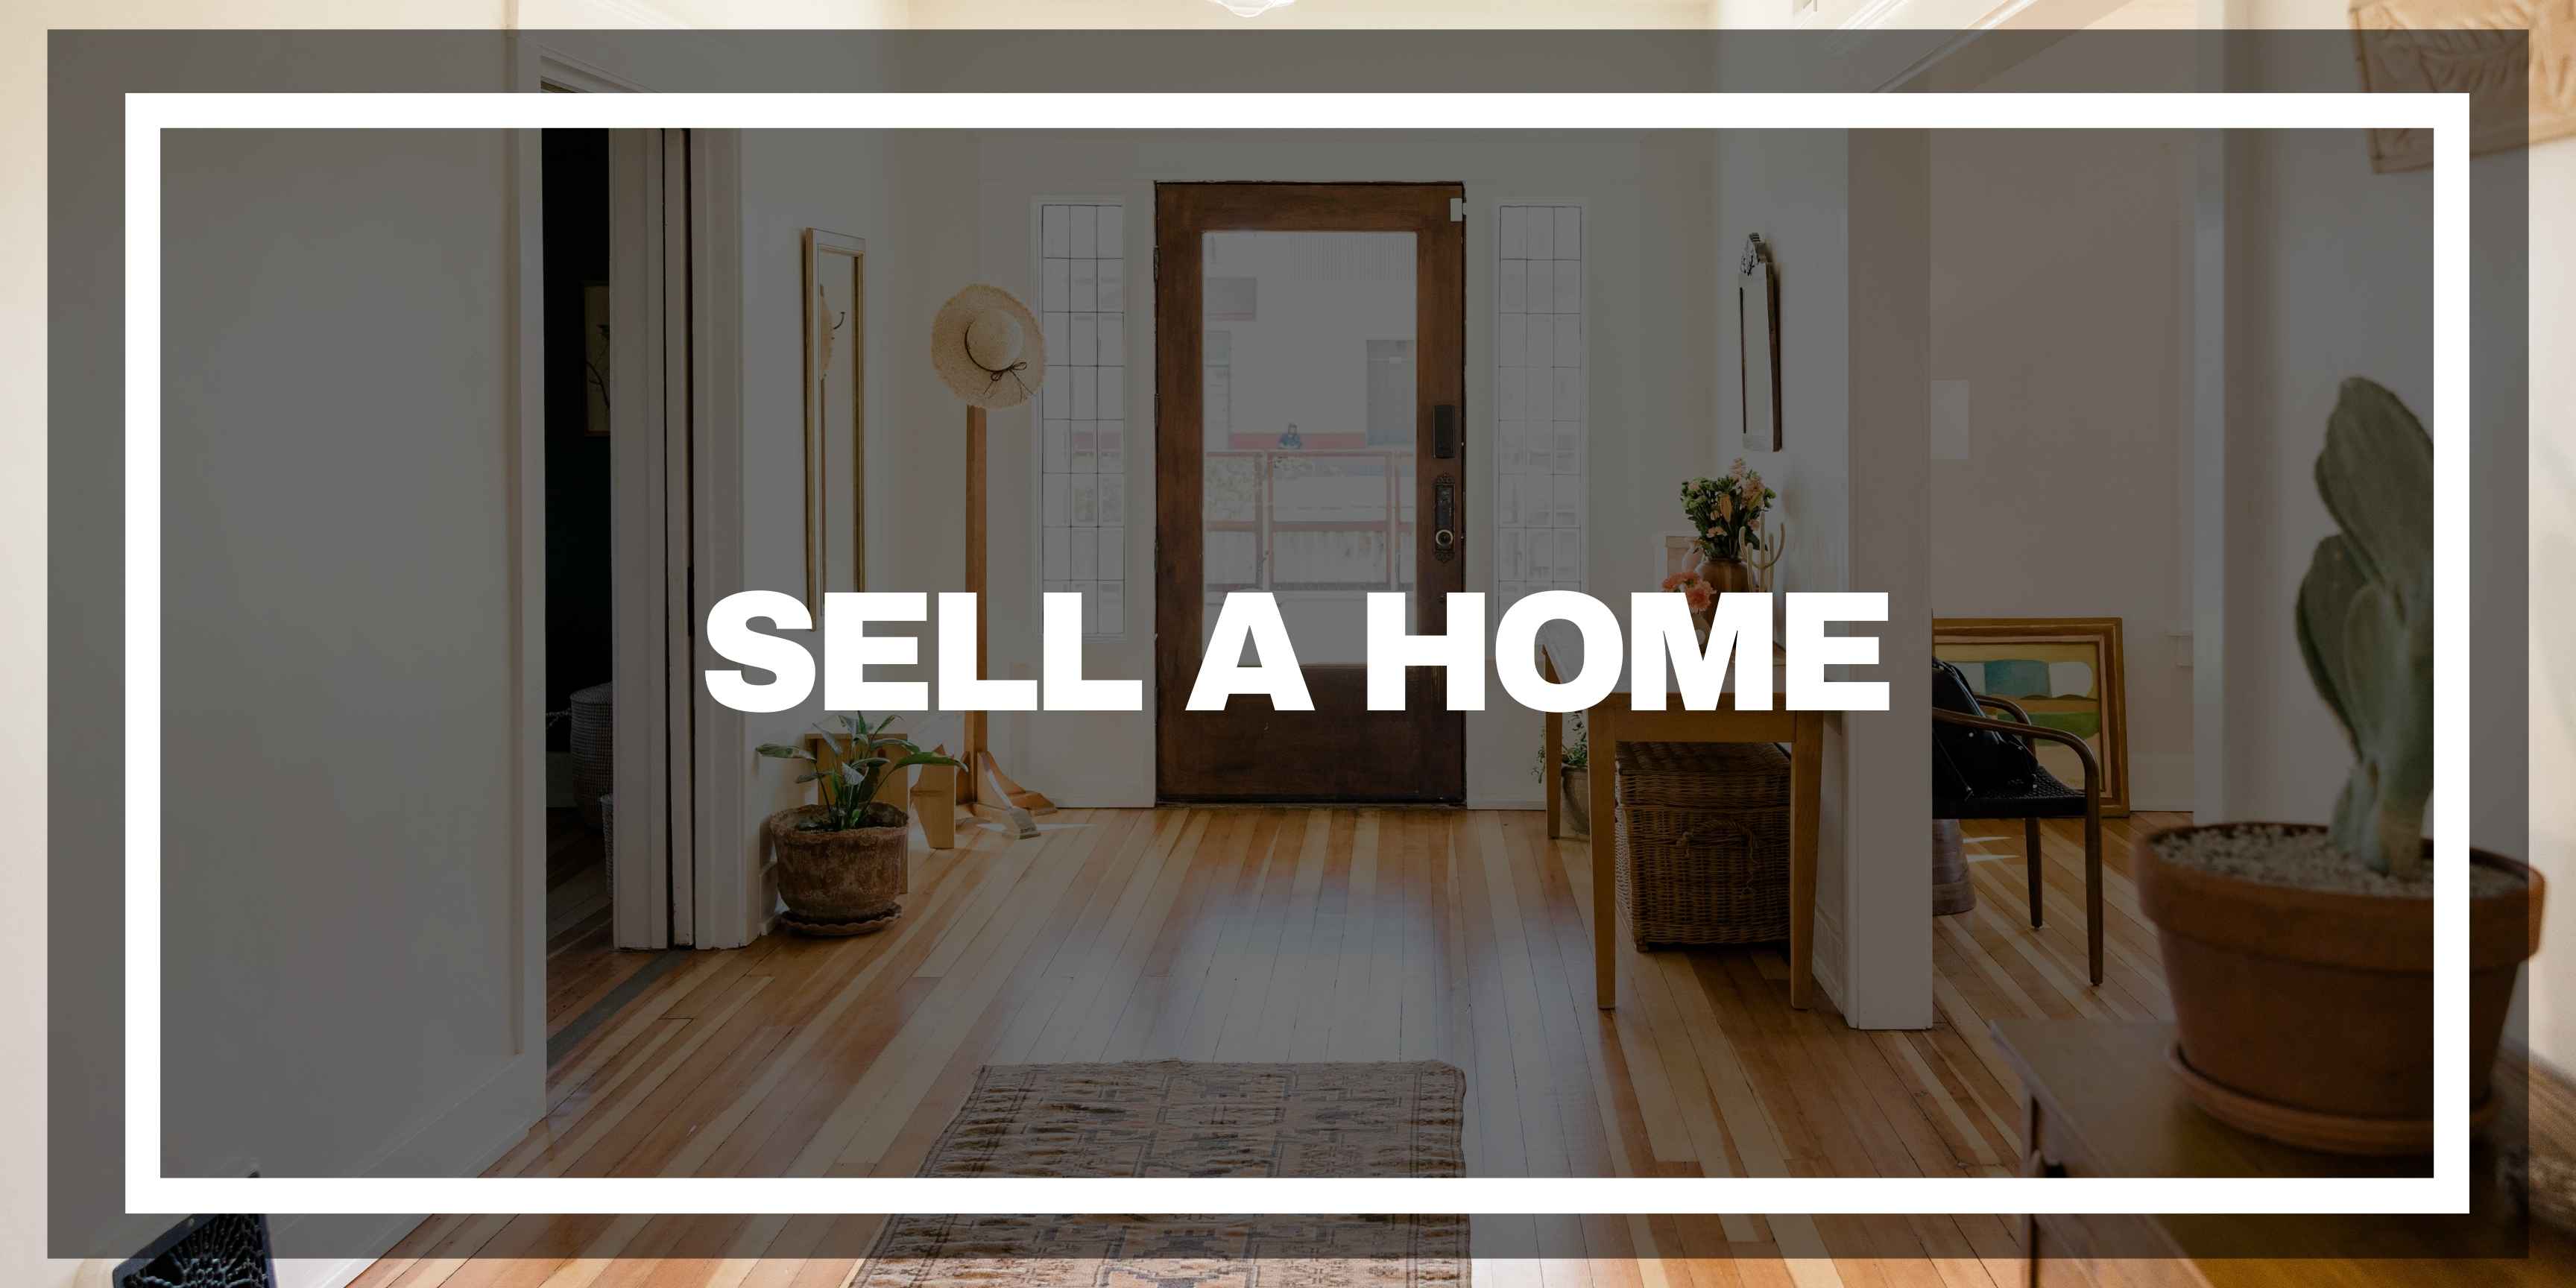 Click this button if you are selling a home